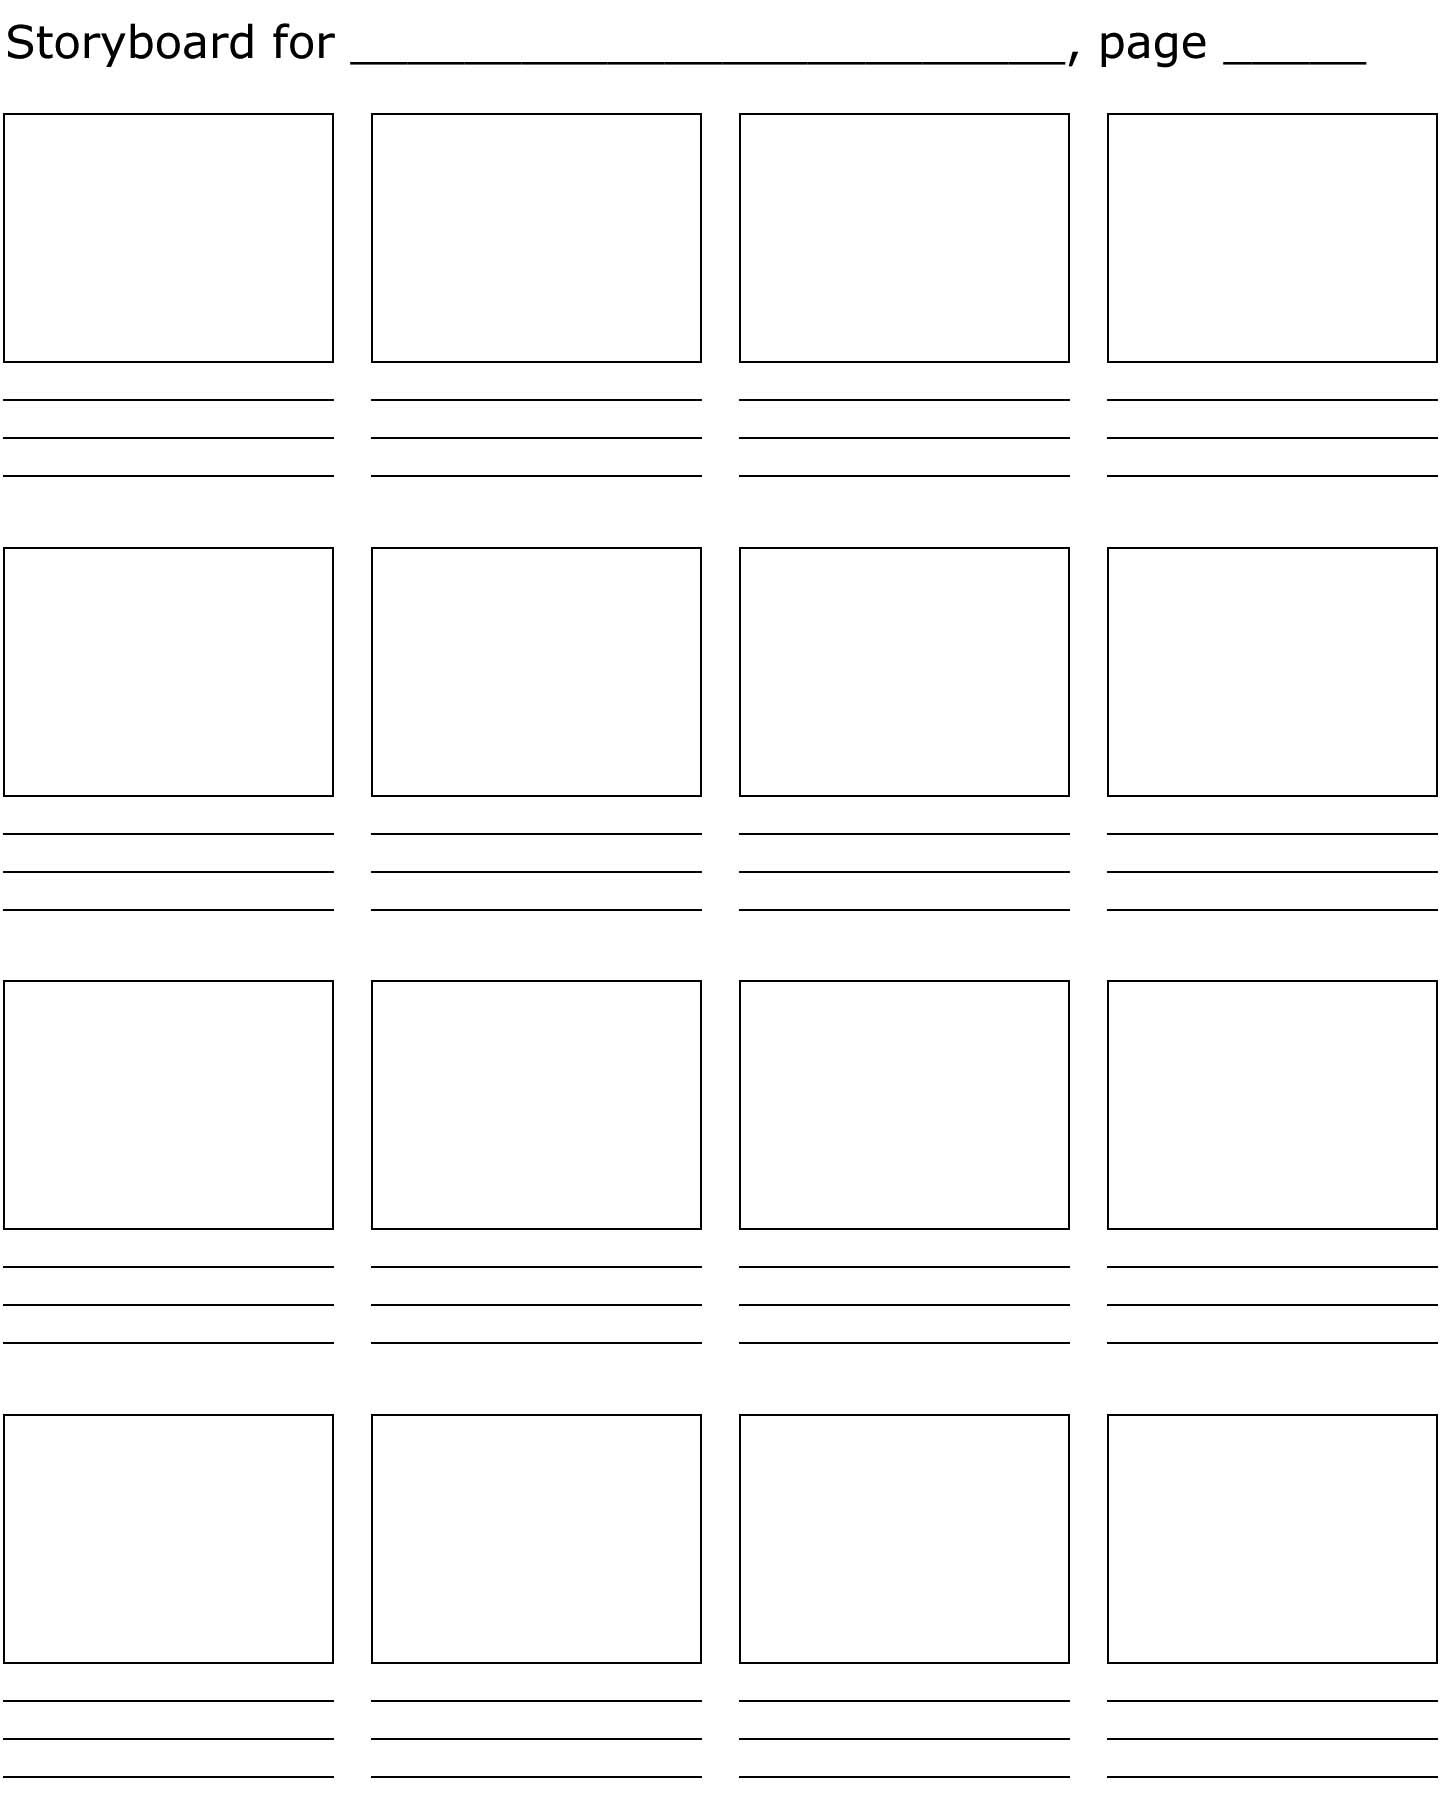 Thumbnail Sketch Template at PaintingValley.com | Explore collection of